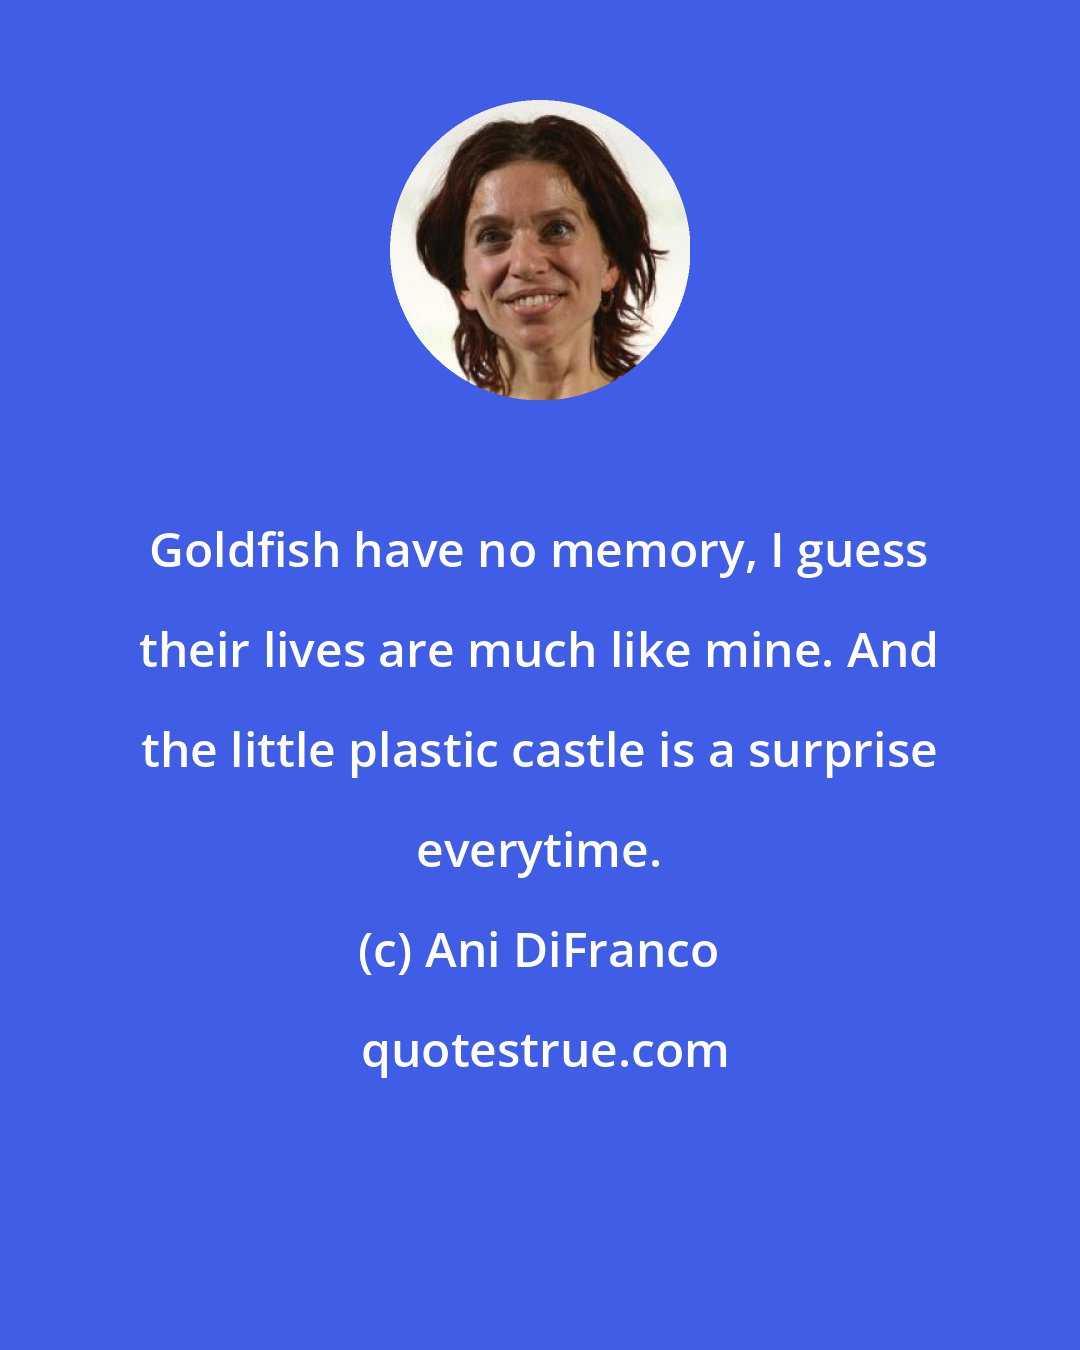 Ani DiFranco: Goldfish have no memory, I guess their lives are much like mine. And the little plastic castle is a surprise everytime.